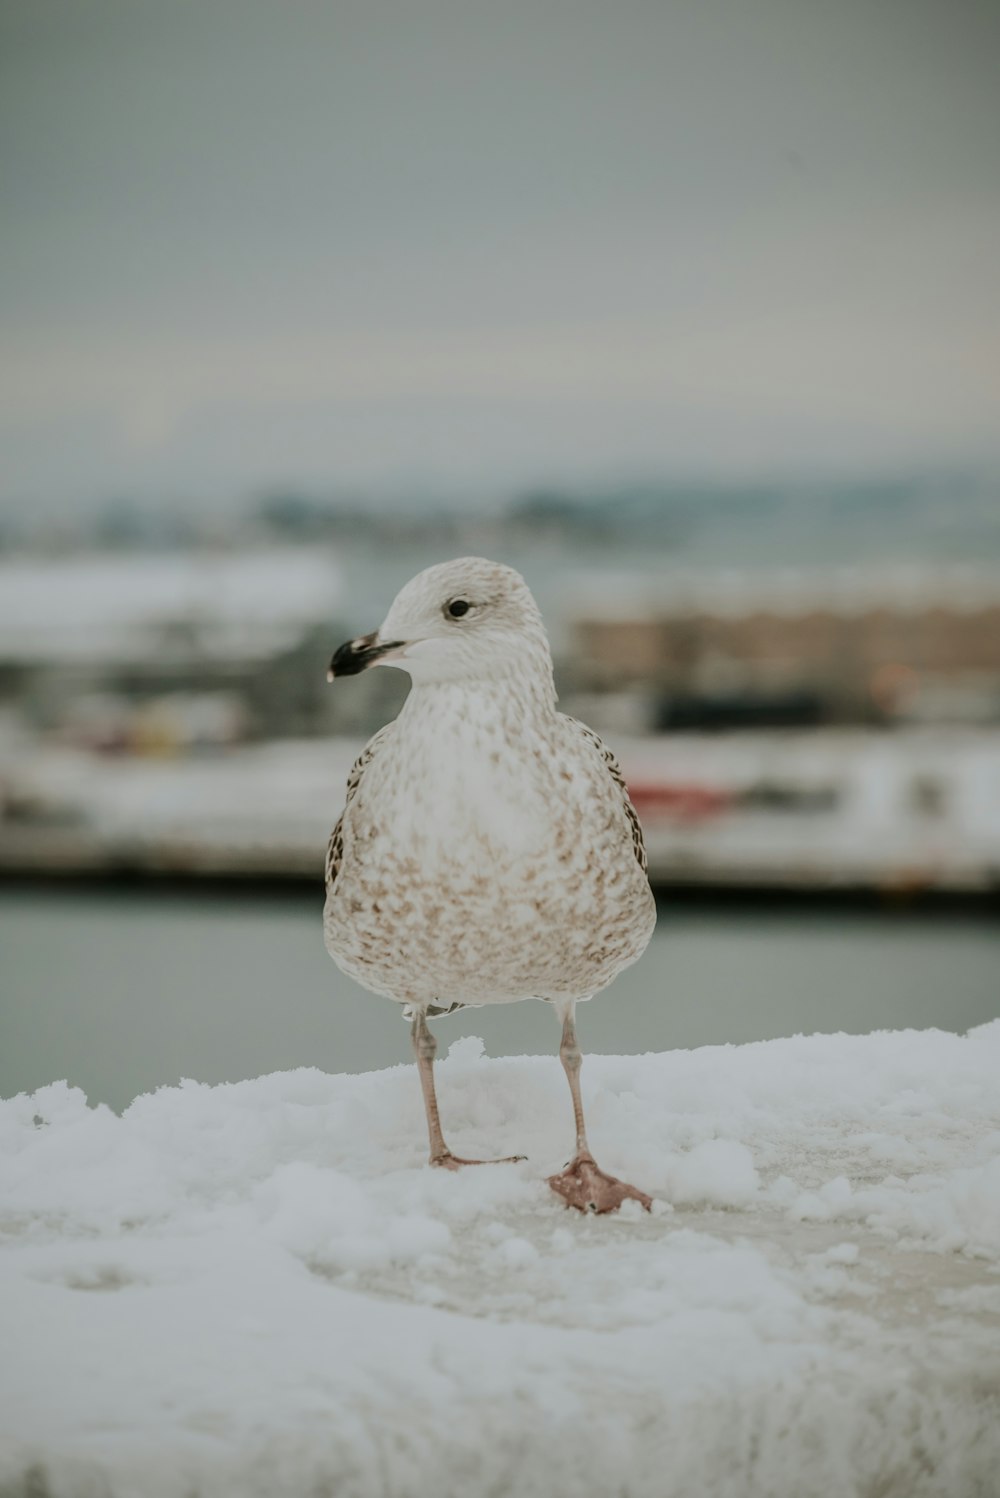 a seagull standing on a ledge in the snow